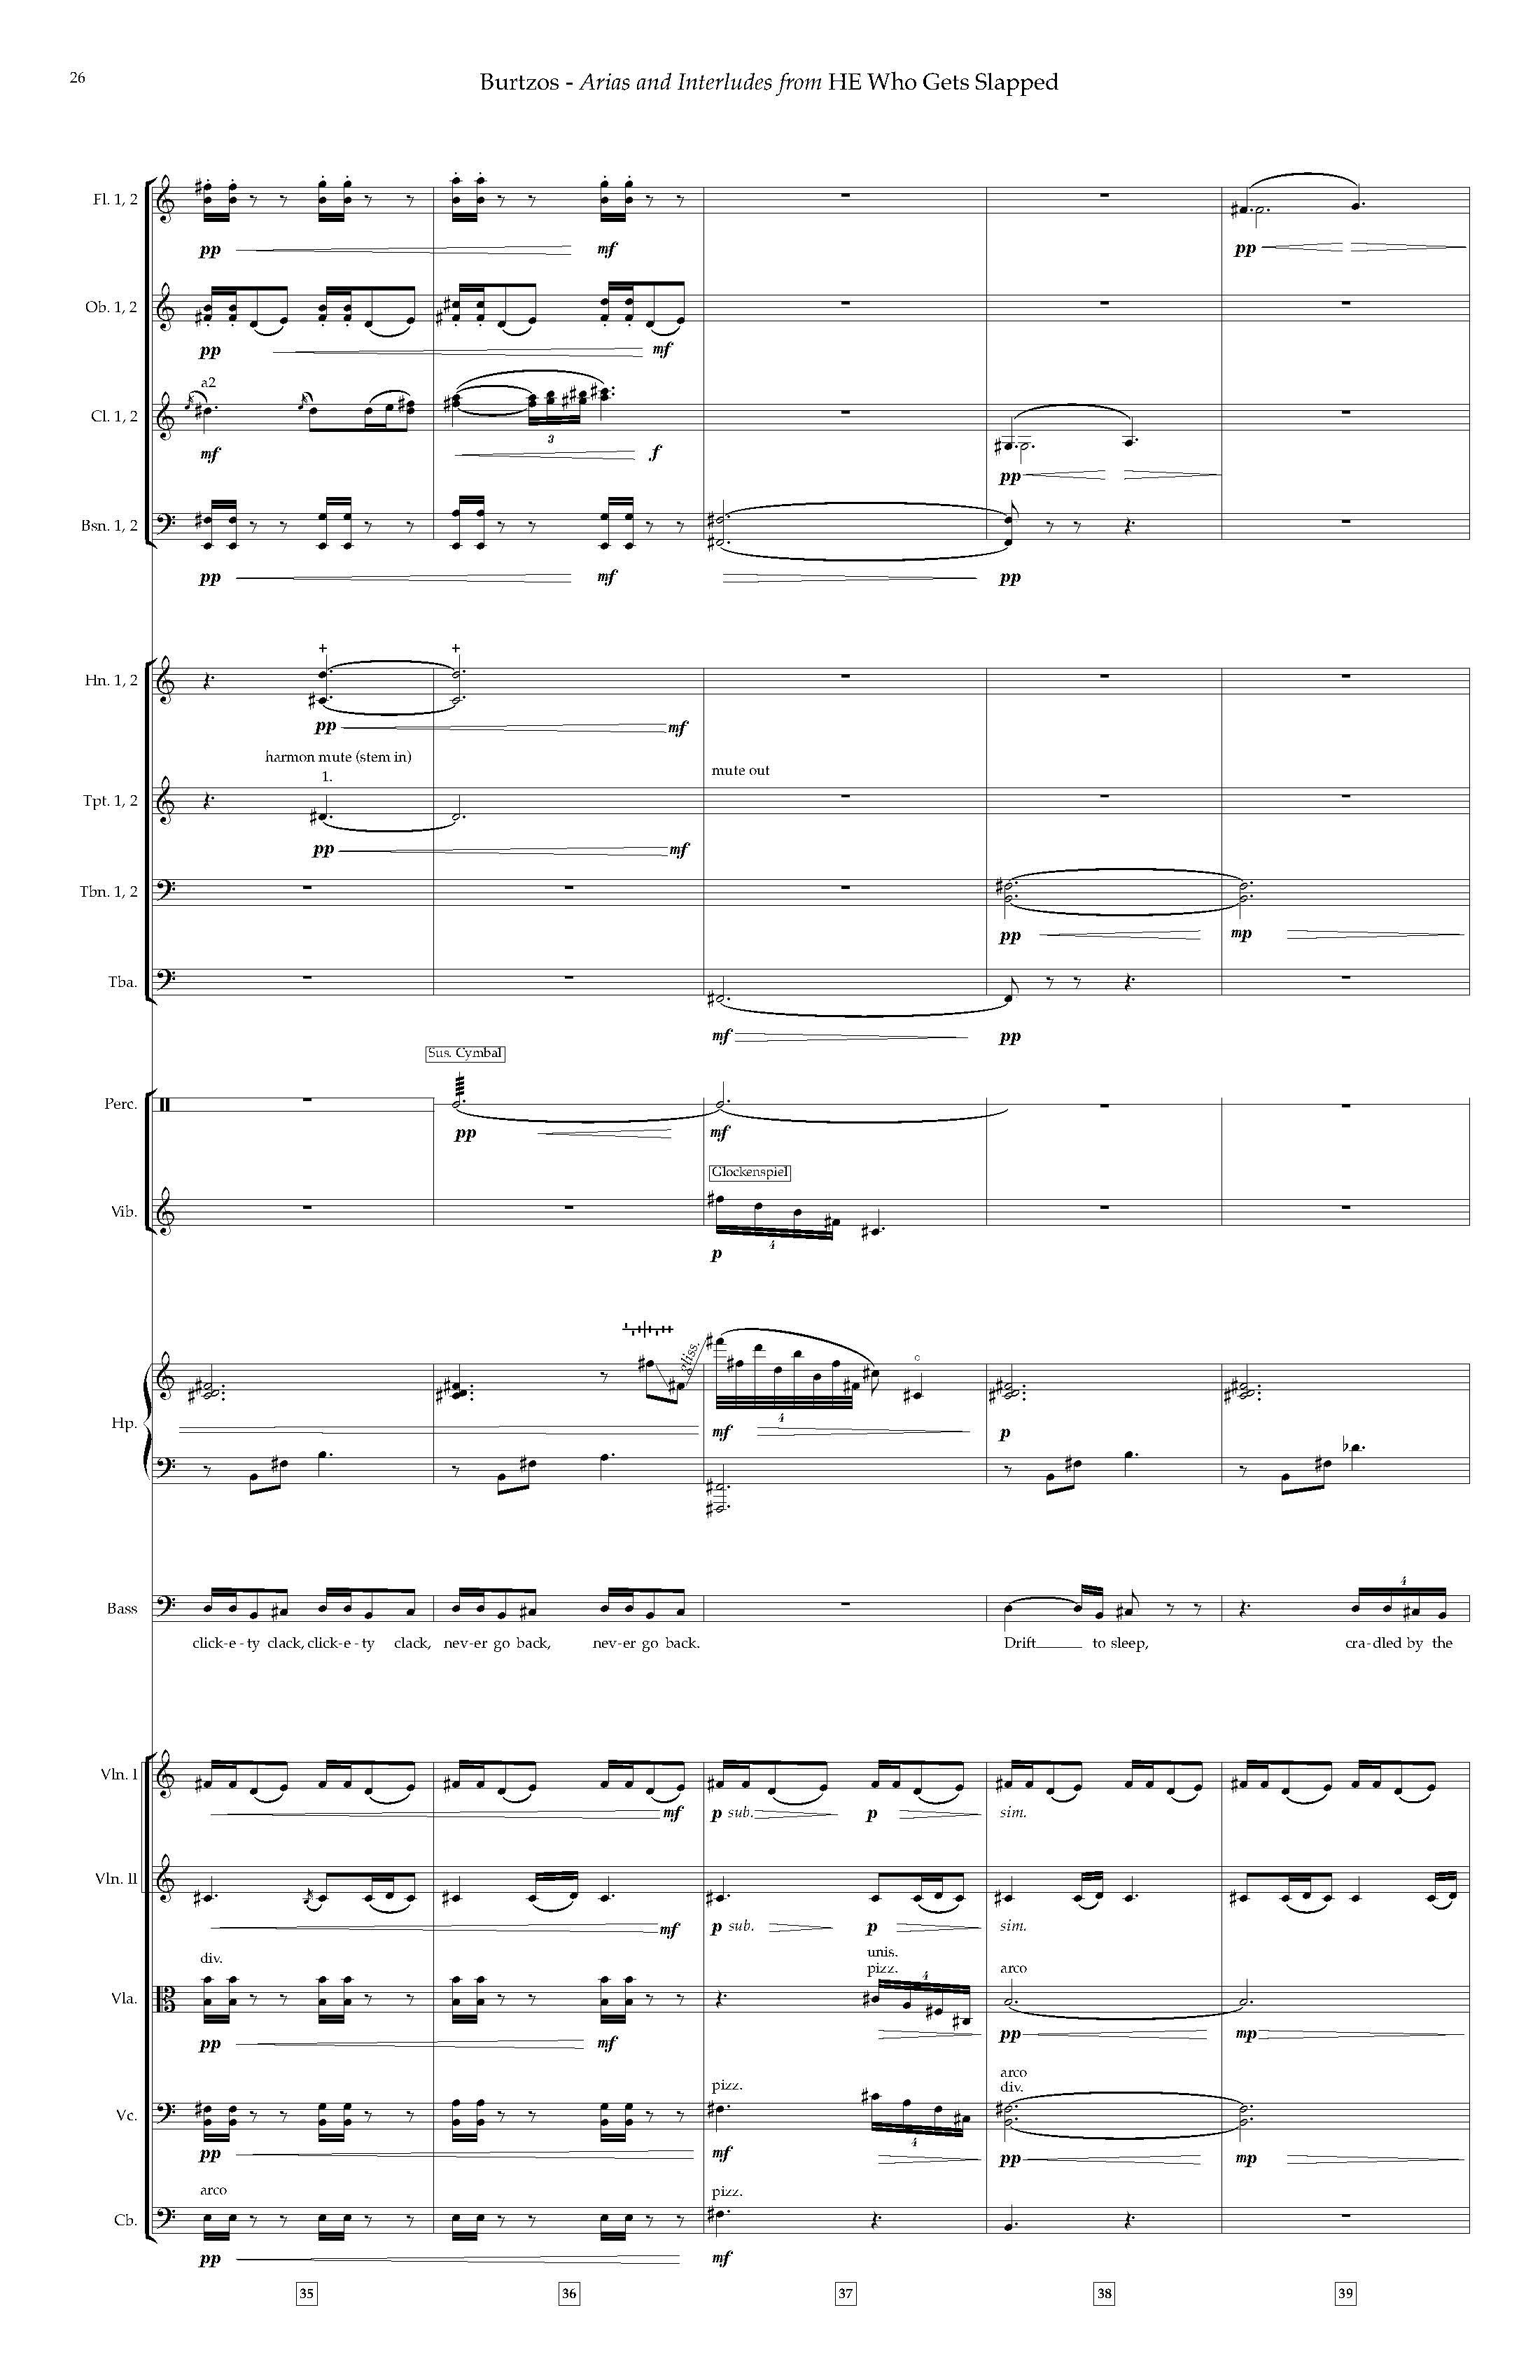 Arias and Interludes from HWGS - Complete Score_Page_32.jpg